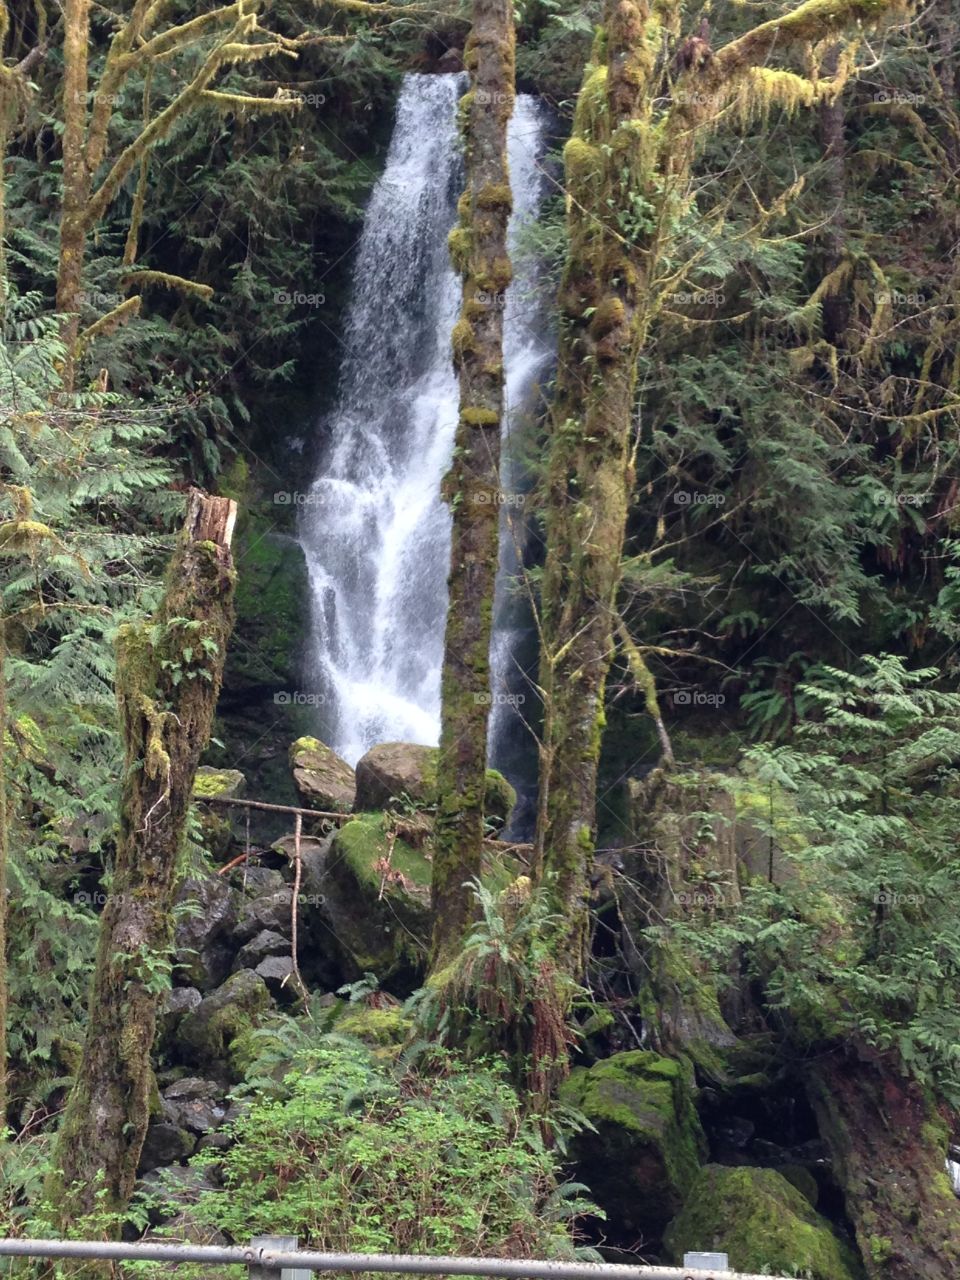 Quinault Waterfall. Roadside waterfall in Quinault 